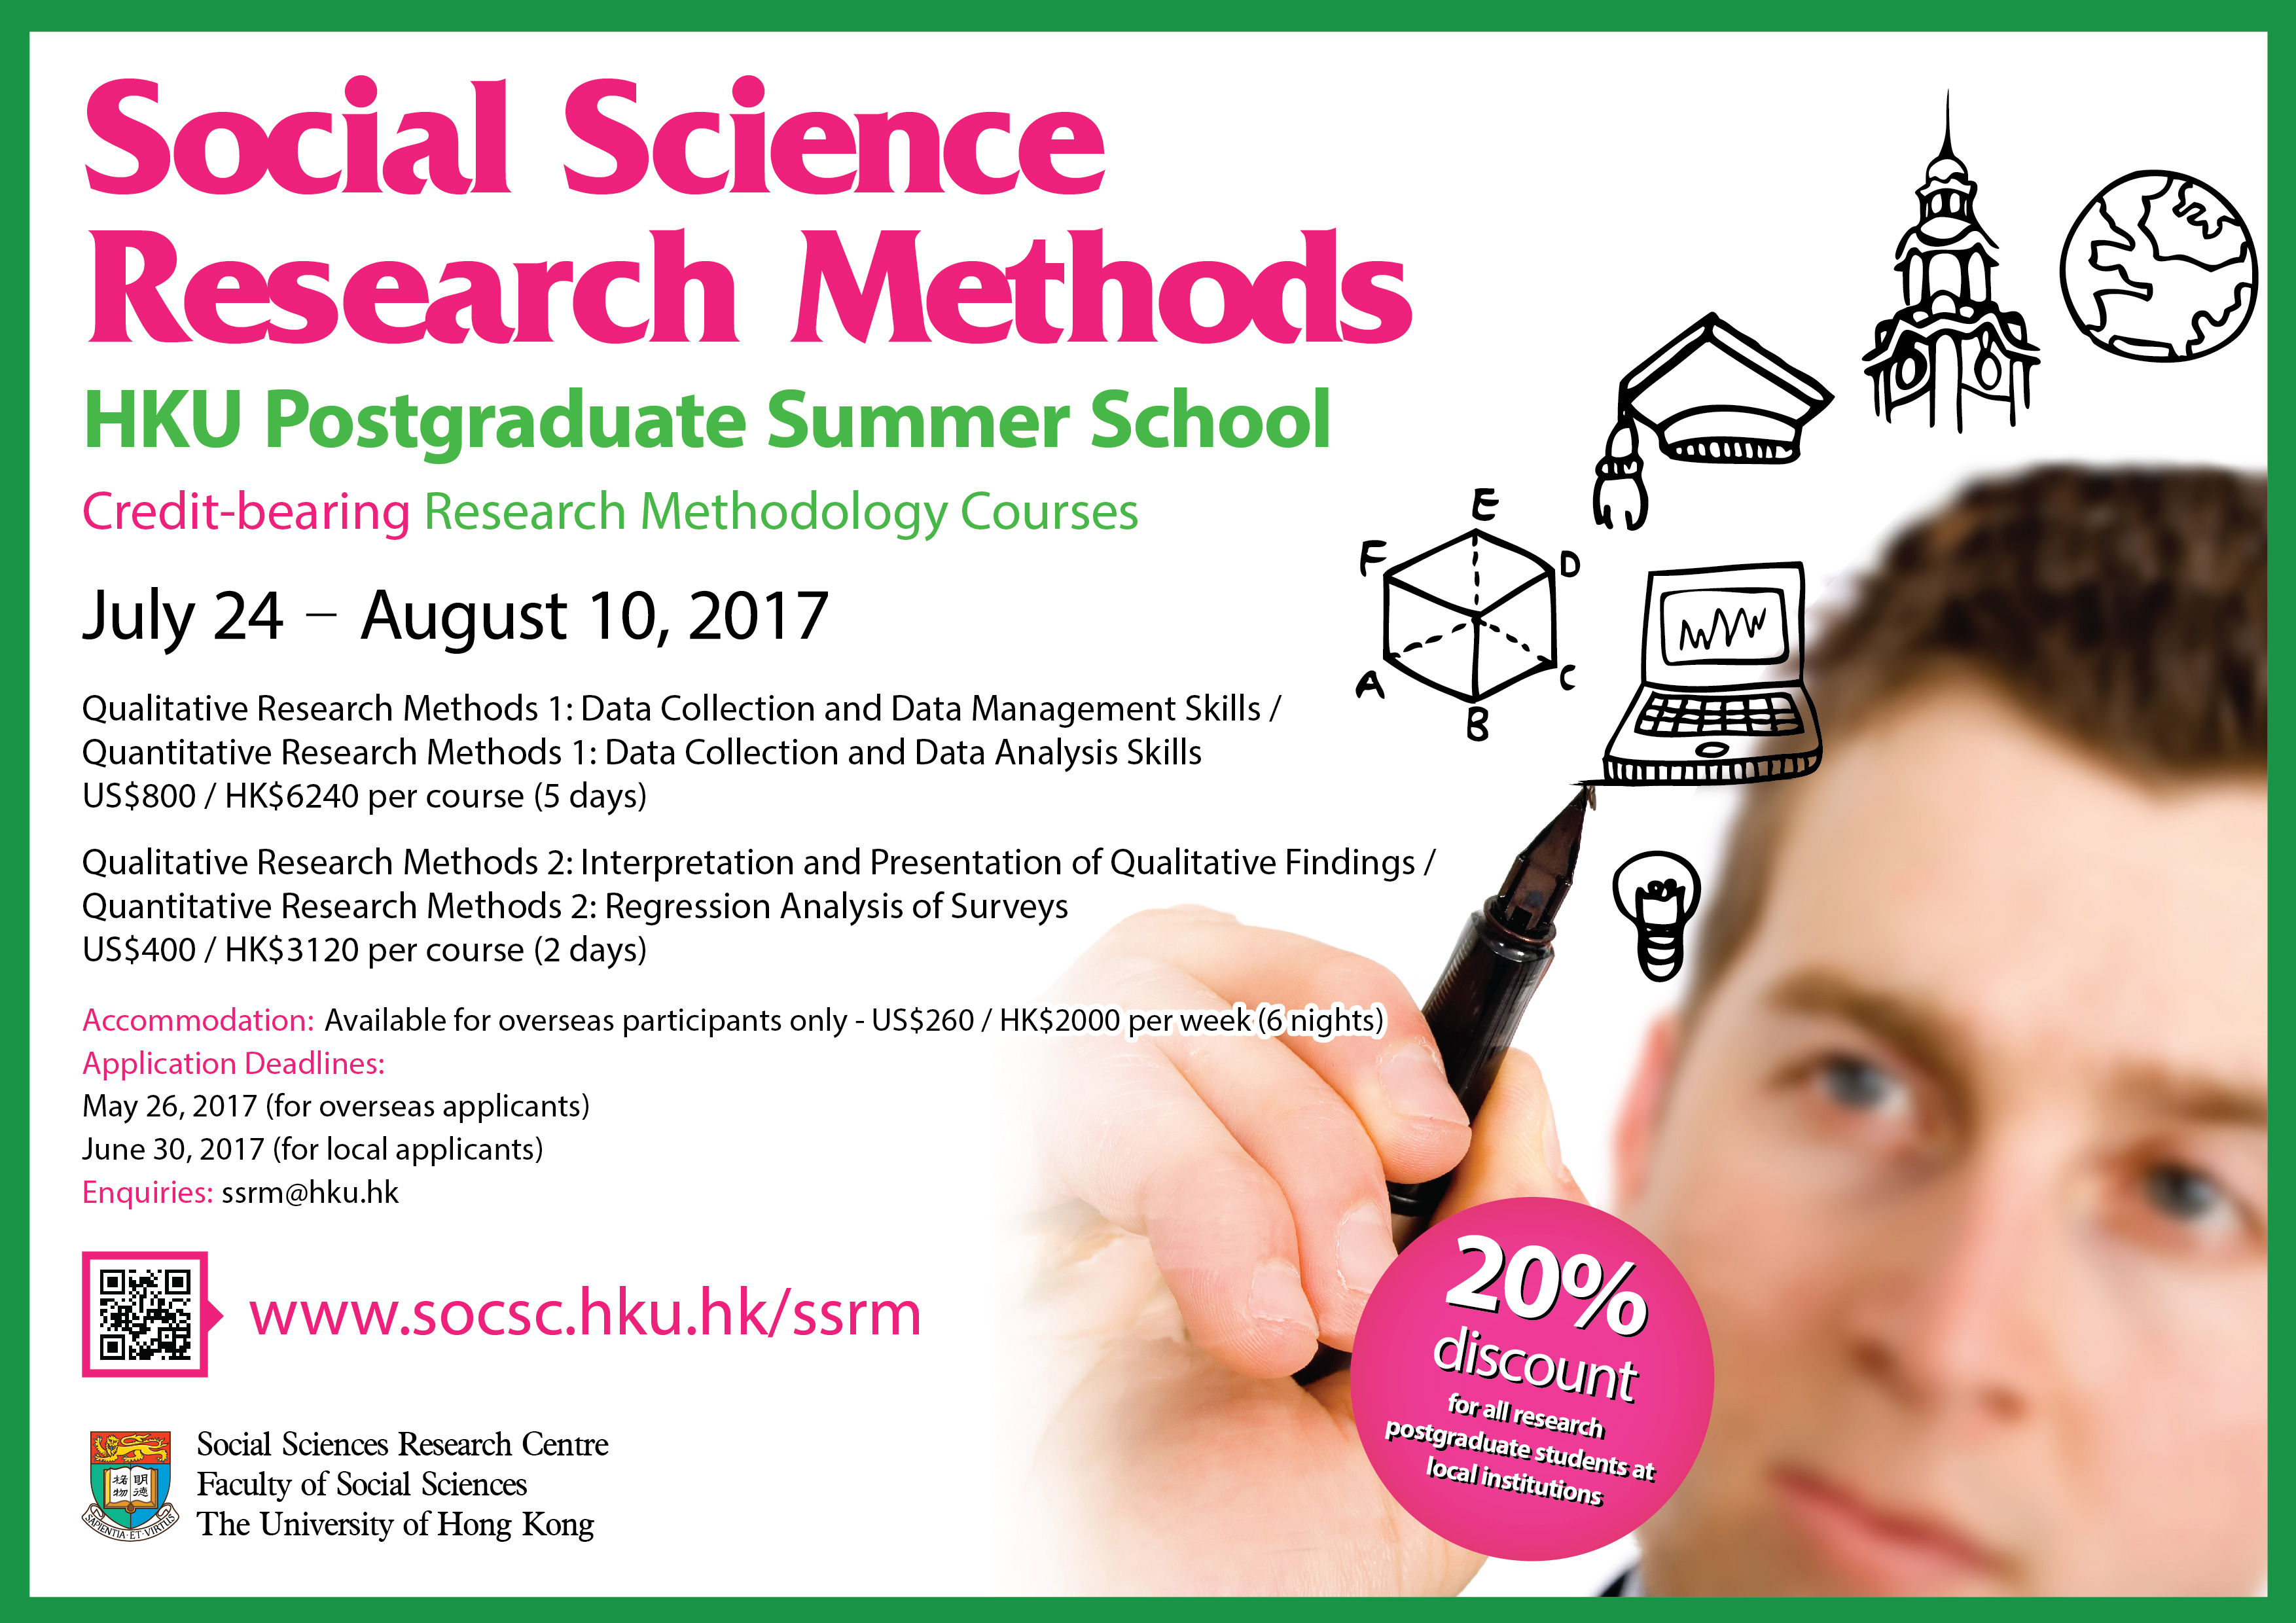 Social Science Research Methods